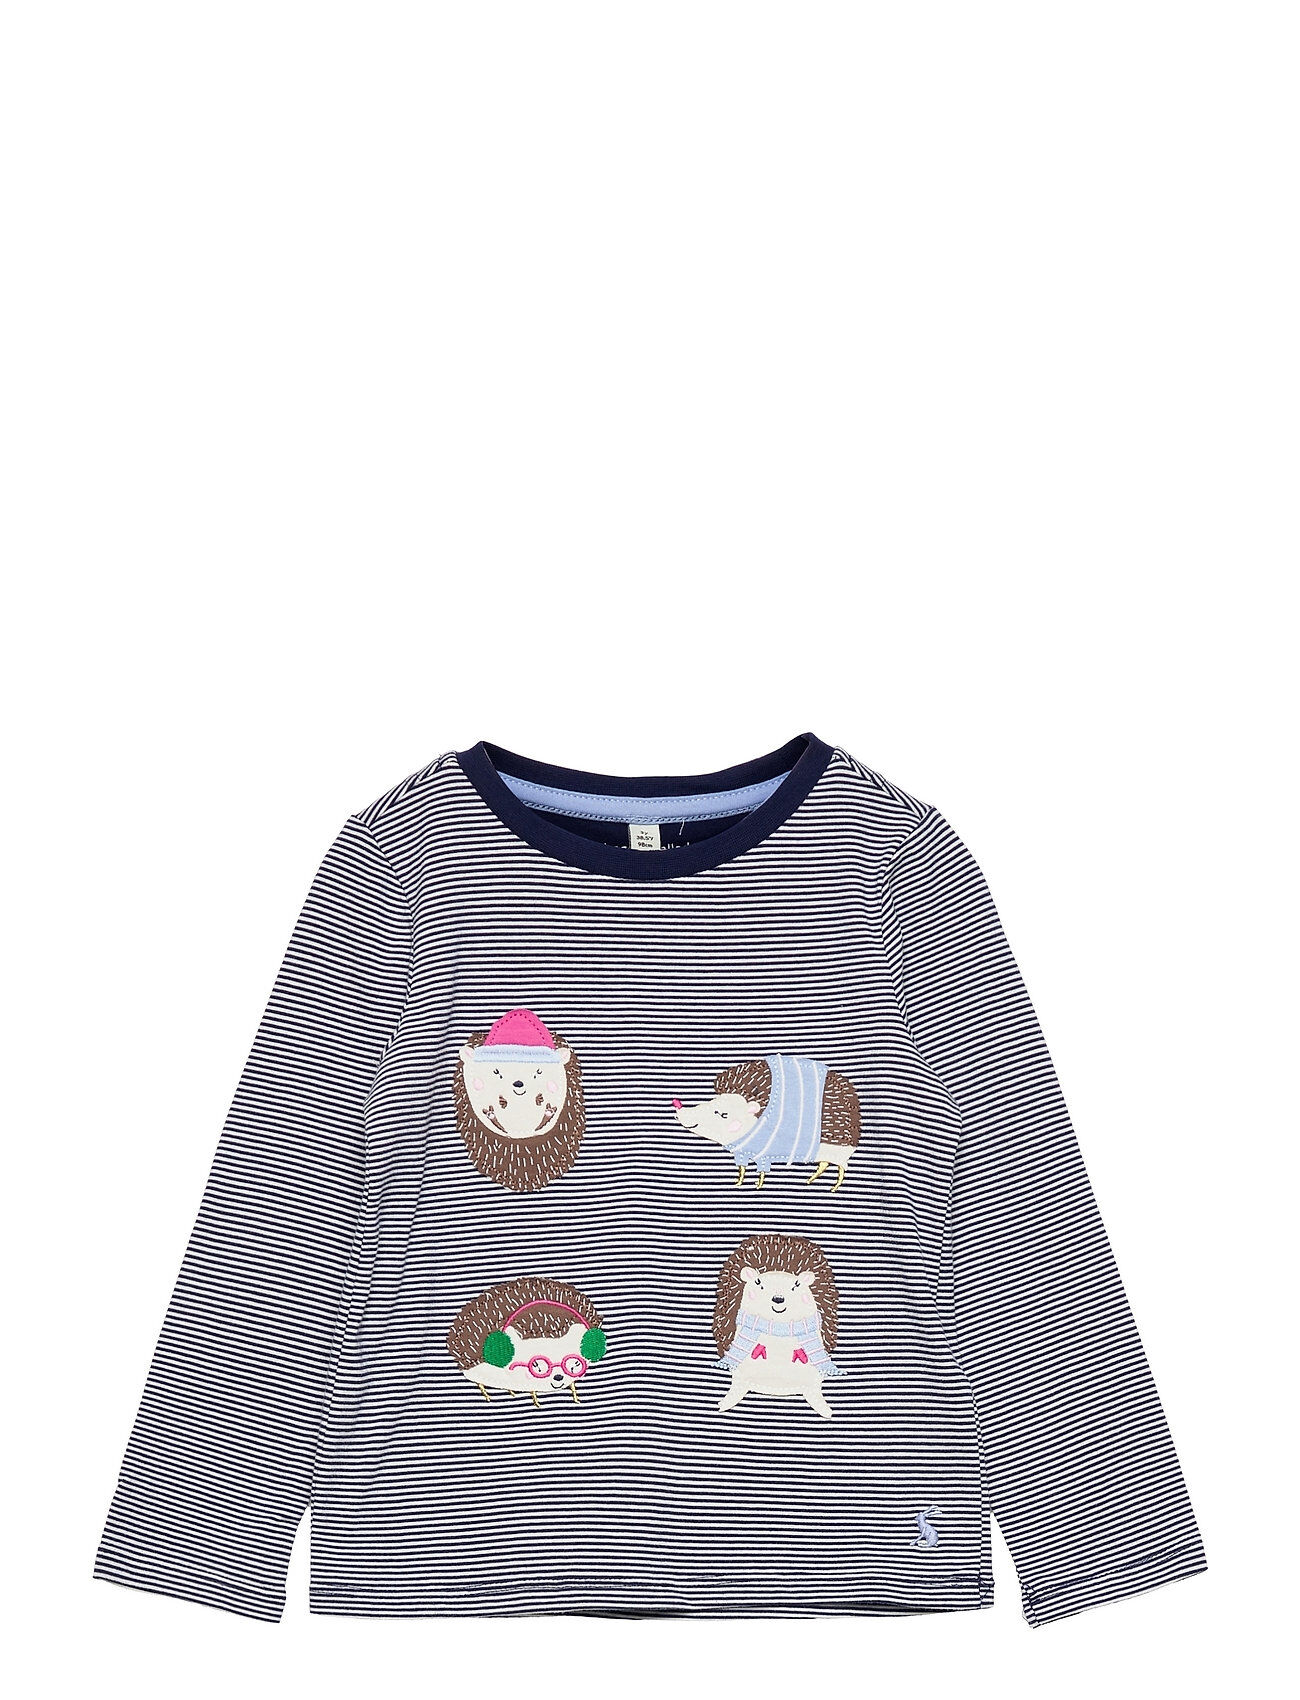 Joules Ava T-shirts Long-sleeved T-shirts Multi/mønstret Joules